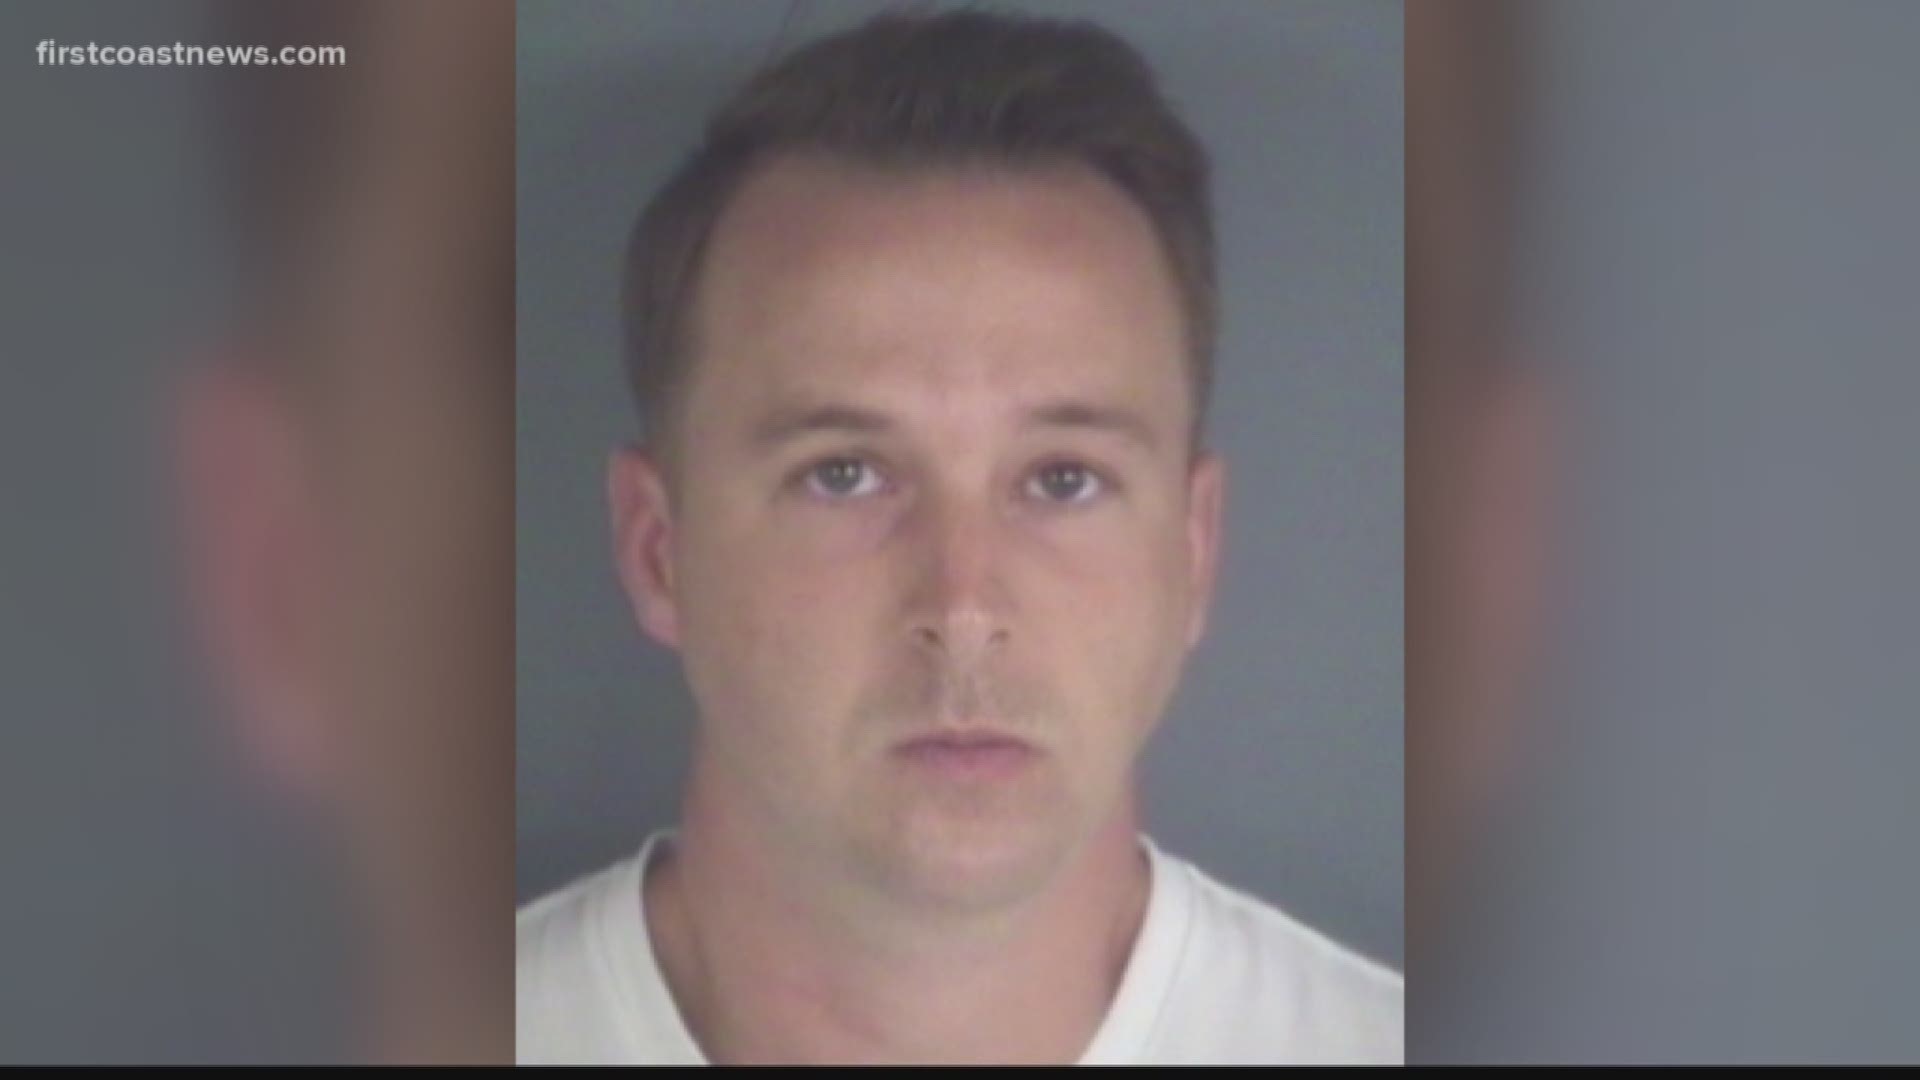 A 31-year-old Naval Station Mayport lieutenant who solicited an undercover officer posing as a parent to have sex with a 12-year-old girl has pleaded guilty, according to the U.S. Attorney’s Office.